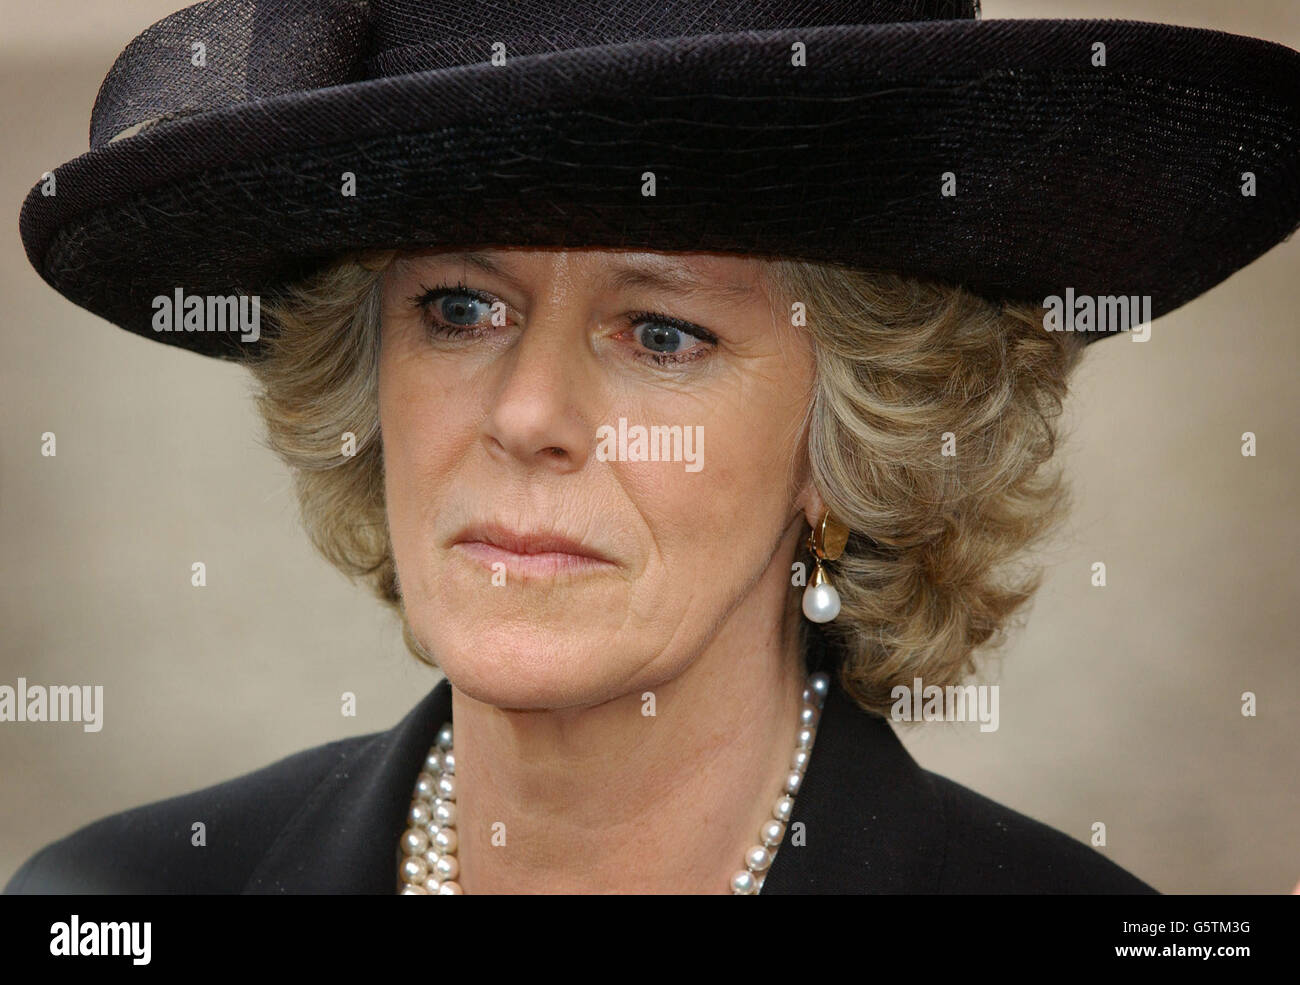 Camilla Parker Bowles, the long-term companion of the Prince of Wales, leaves Westminster Abbey following Princess Margaret's memorial service in London. Princess Margaret, the younger sister of Britain's Queen Elizabeth II, died on February 9, aged 71. Stock Photo